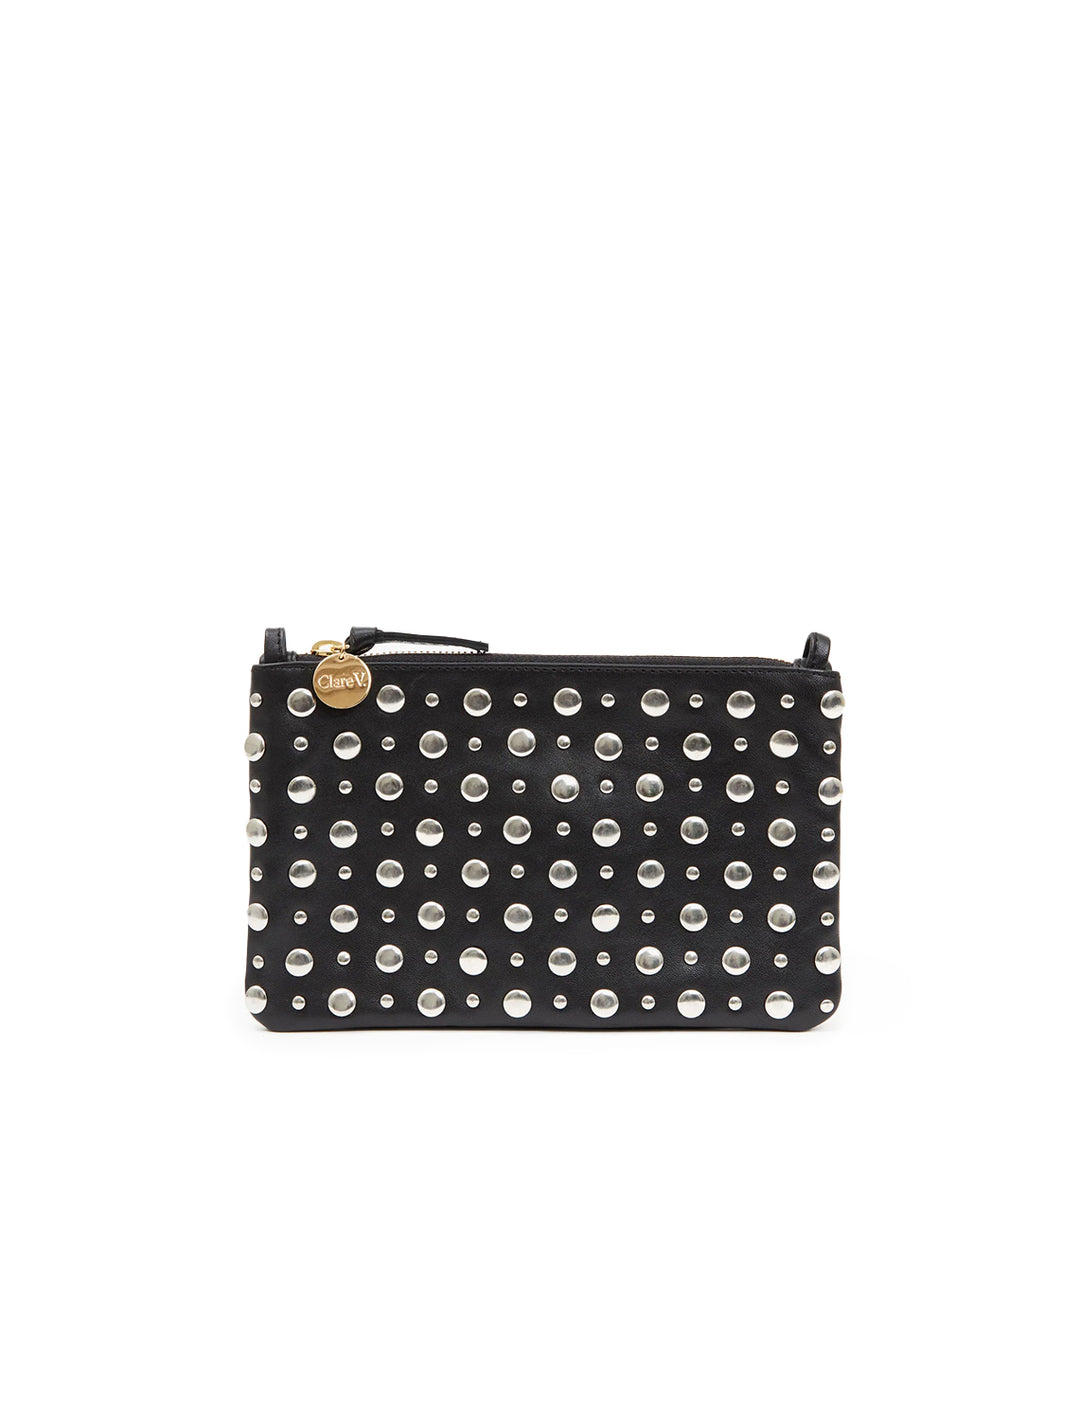 Clare V. - Petit Moyen Messenger in Black with Silver Studs